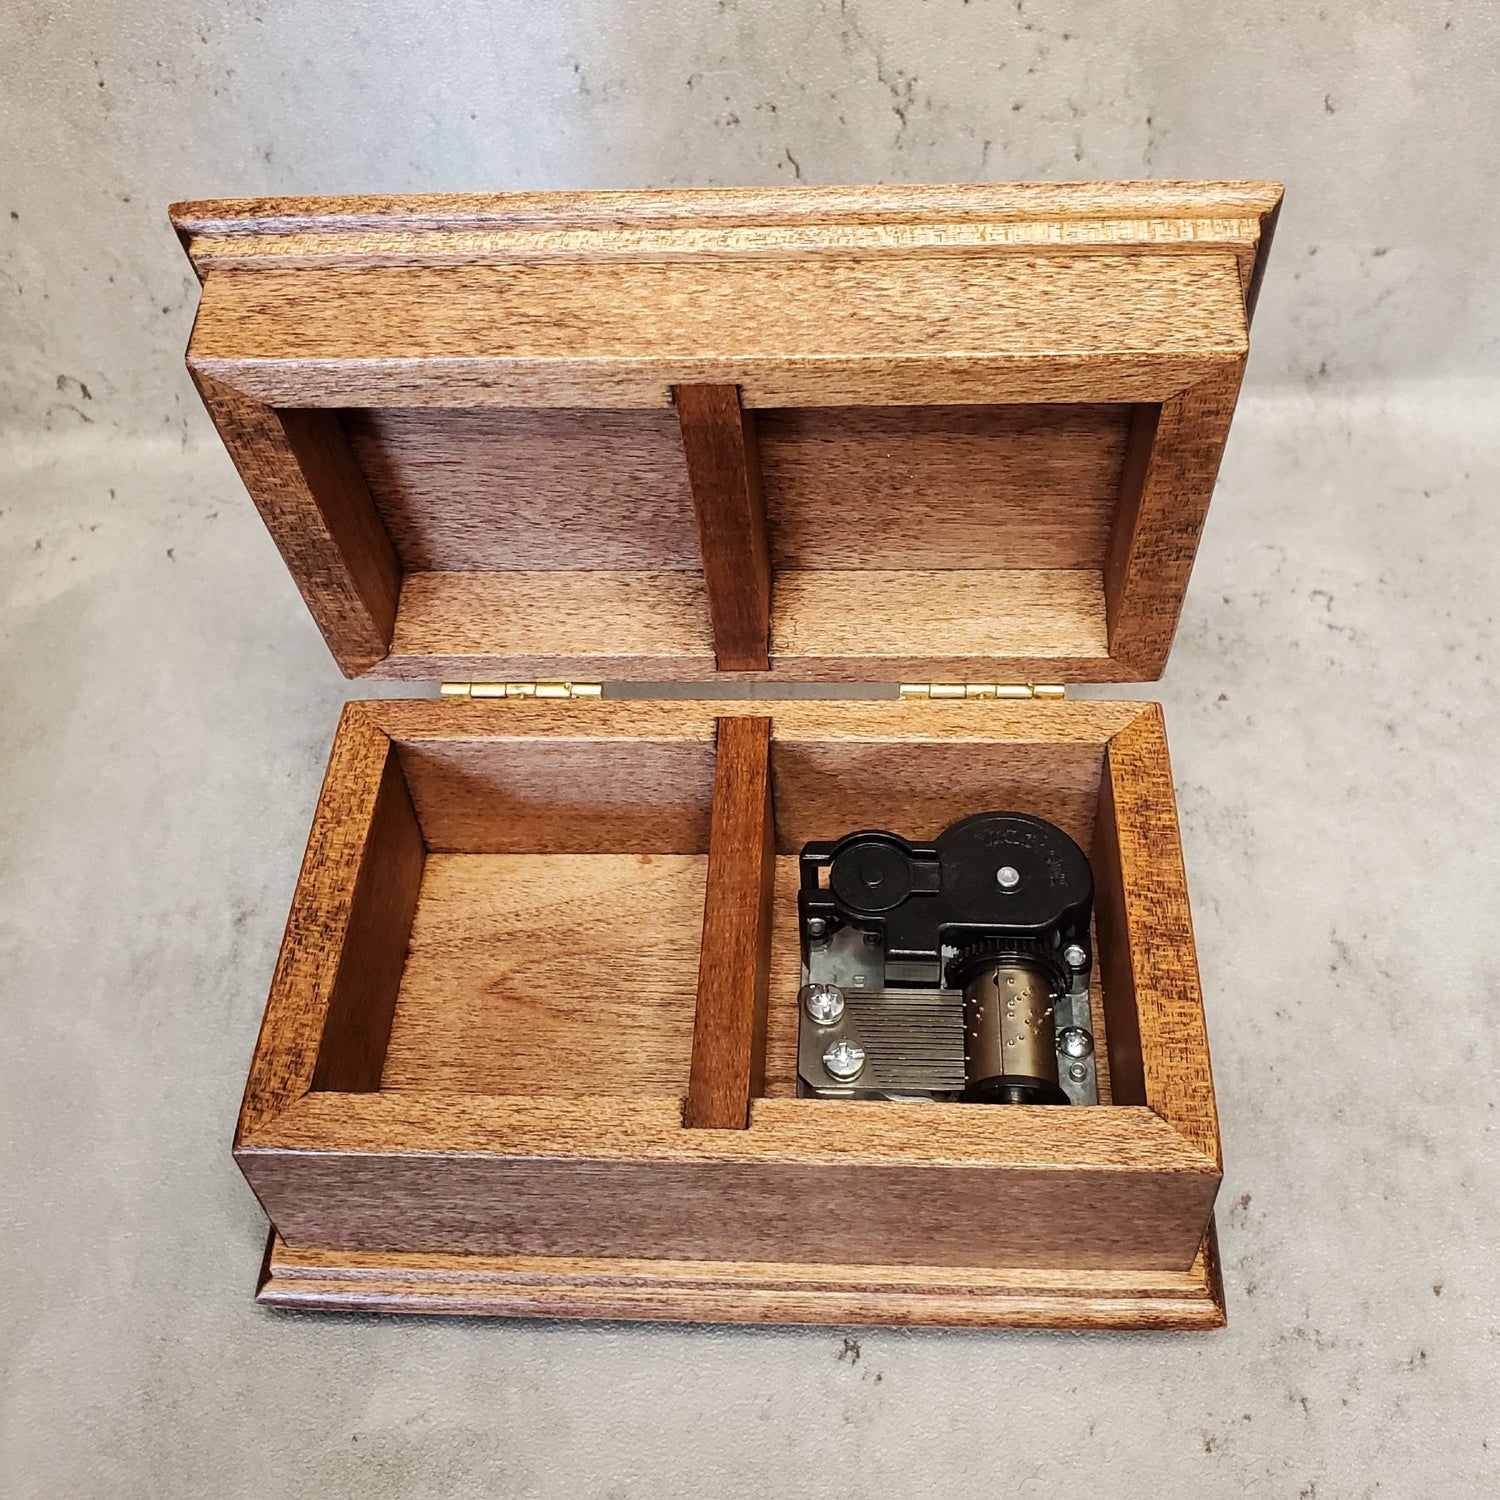 music jewelry box with open lid showing wind up music box movement inside